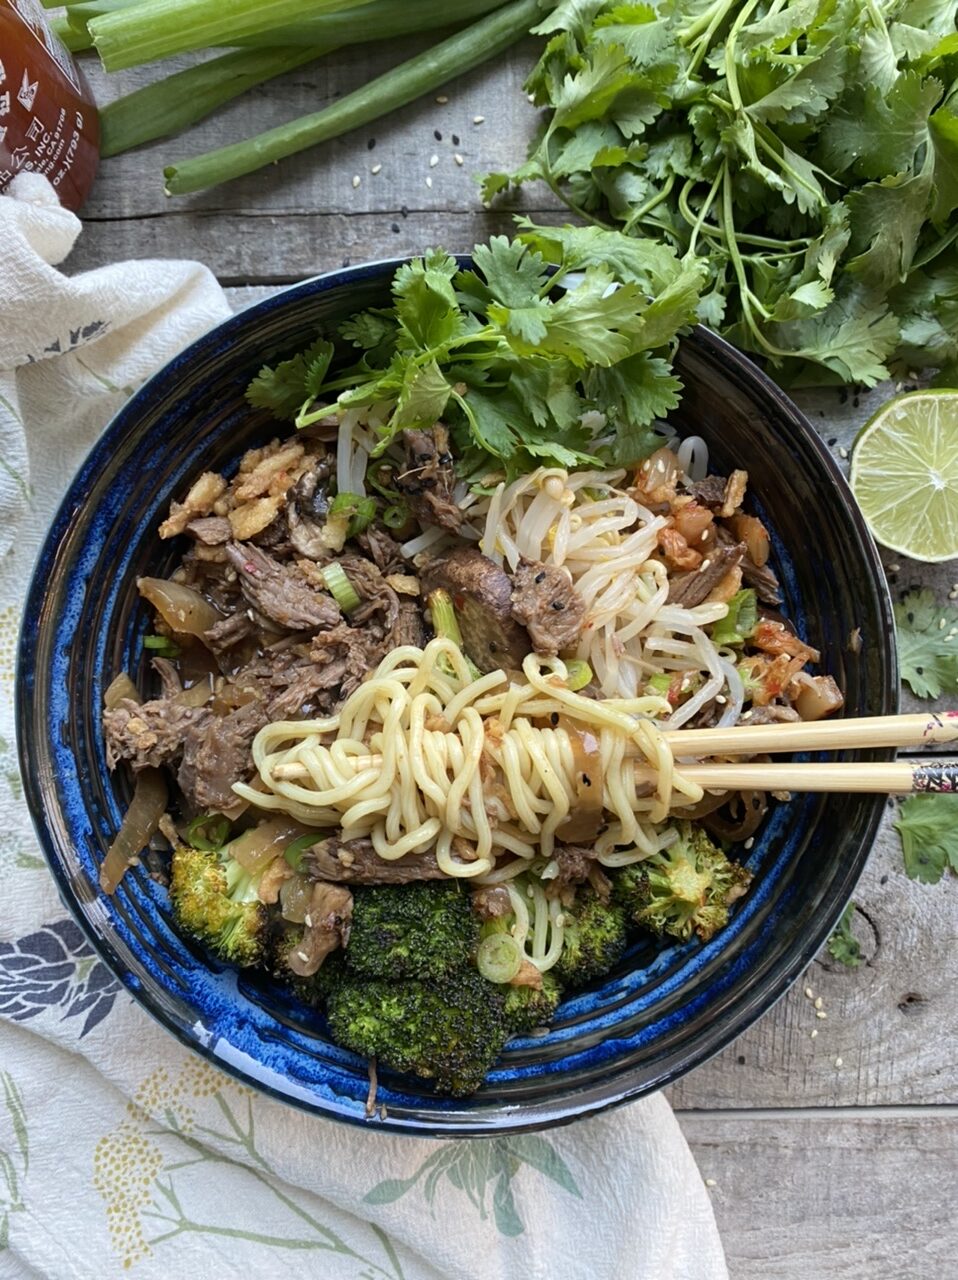 A77D20D4 6D54 47BB 9659 25B7EED900C4 e1624036551245 - Slow Cooker Asian Ginger Noodles with Spicy Pulled Beef & Roasted Broccoli